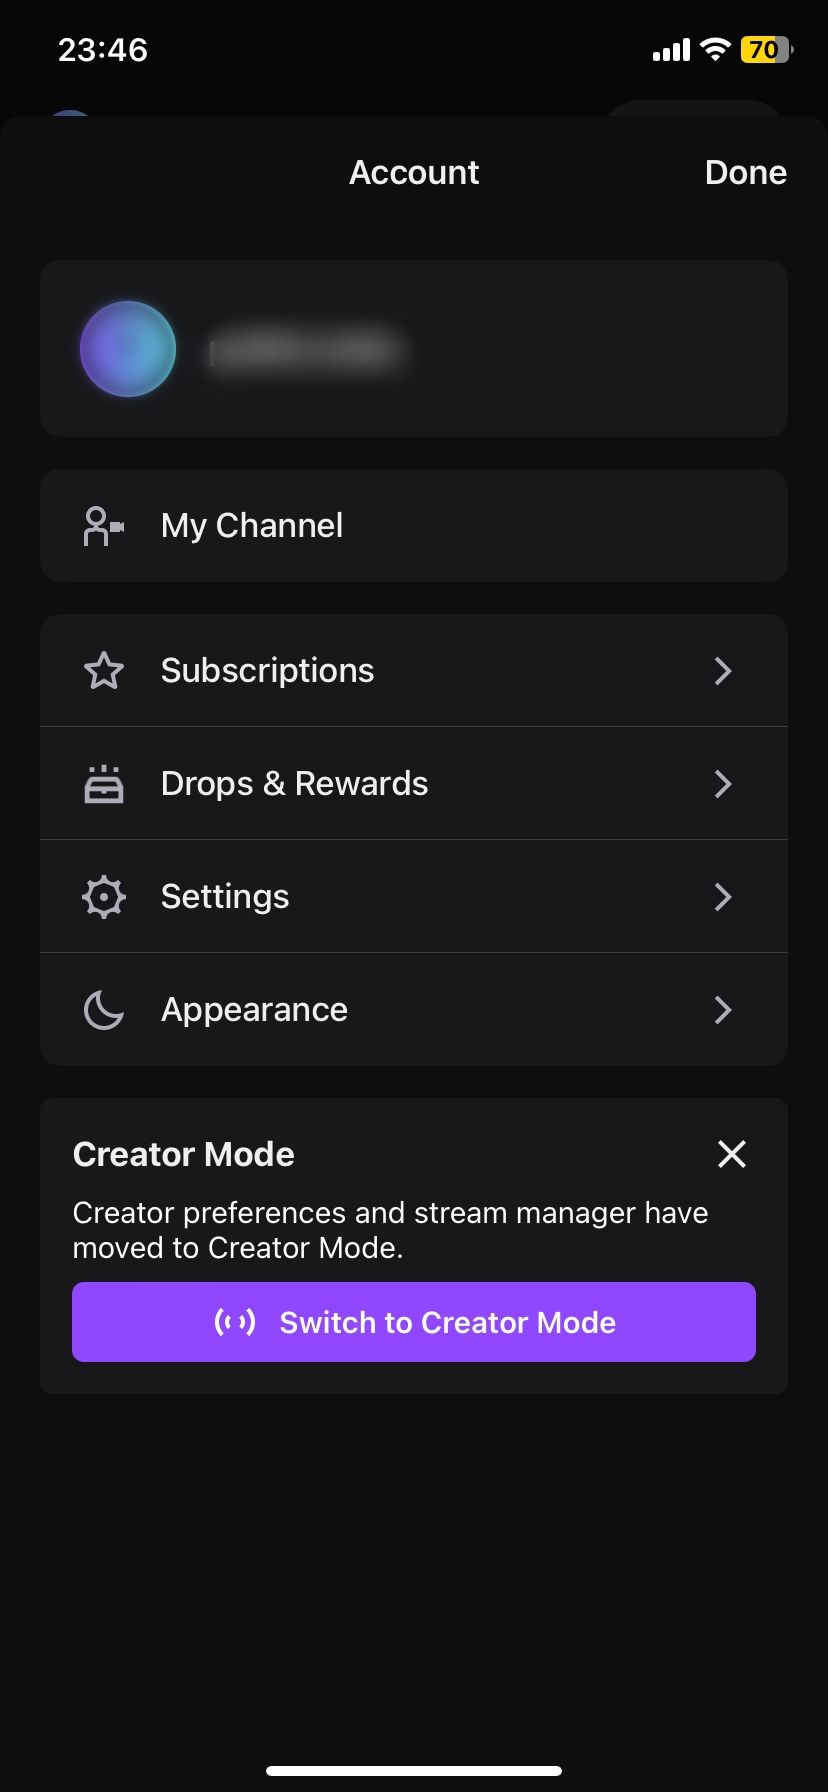 Twitch Account view page